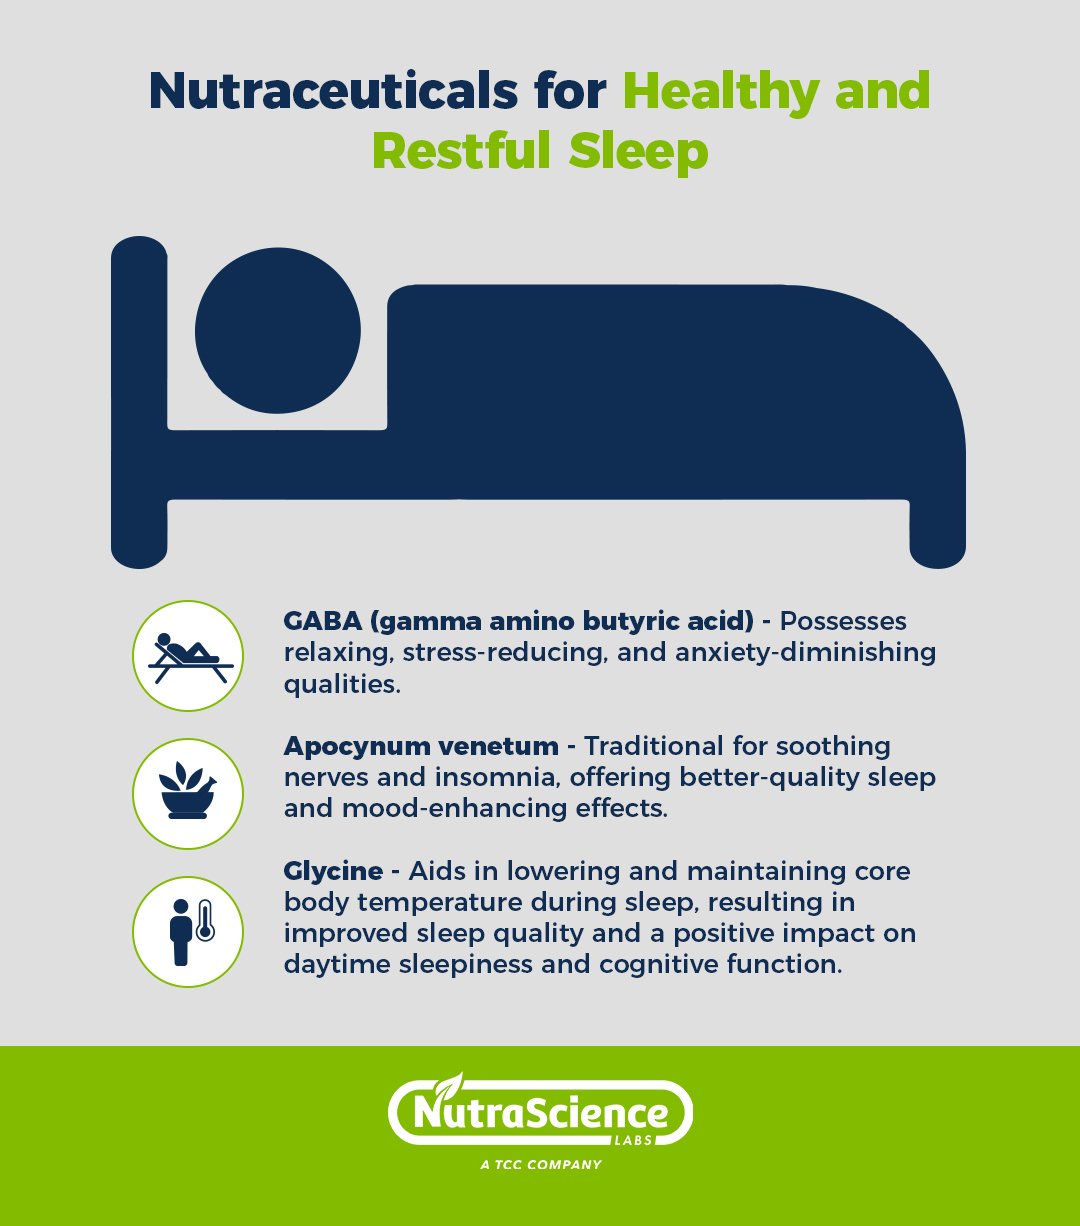 Nutraceuticals for Healthy and Restful Sleep - Infographic